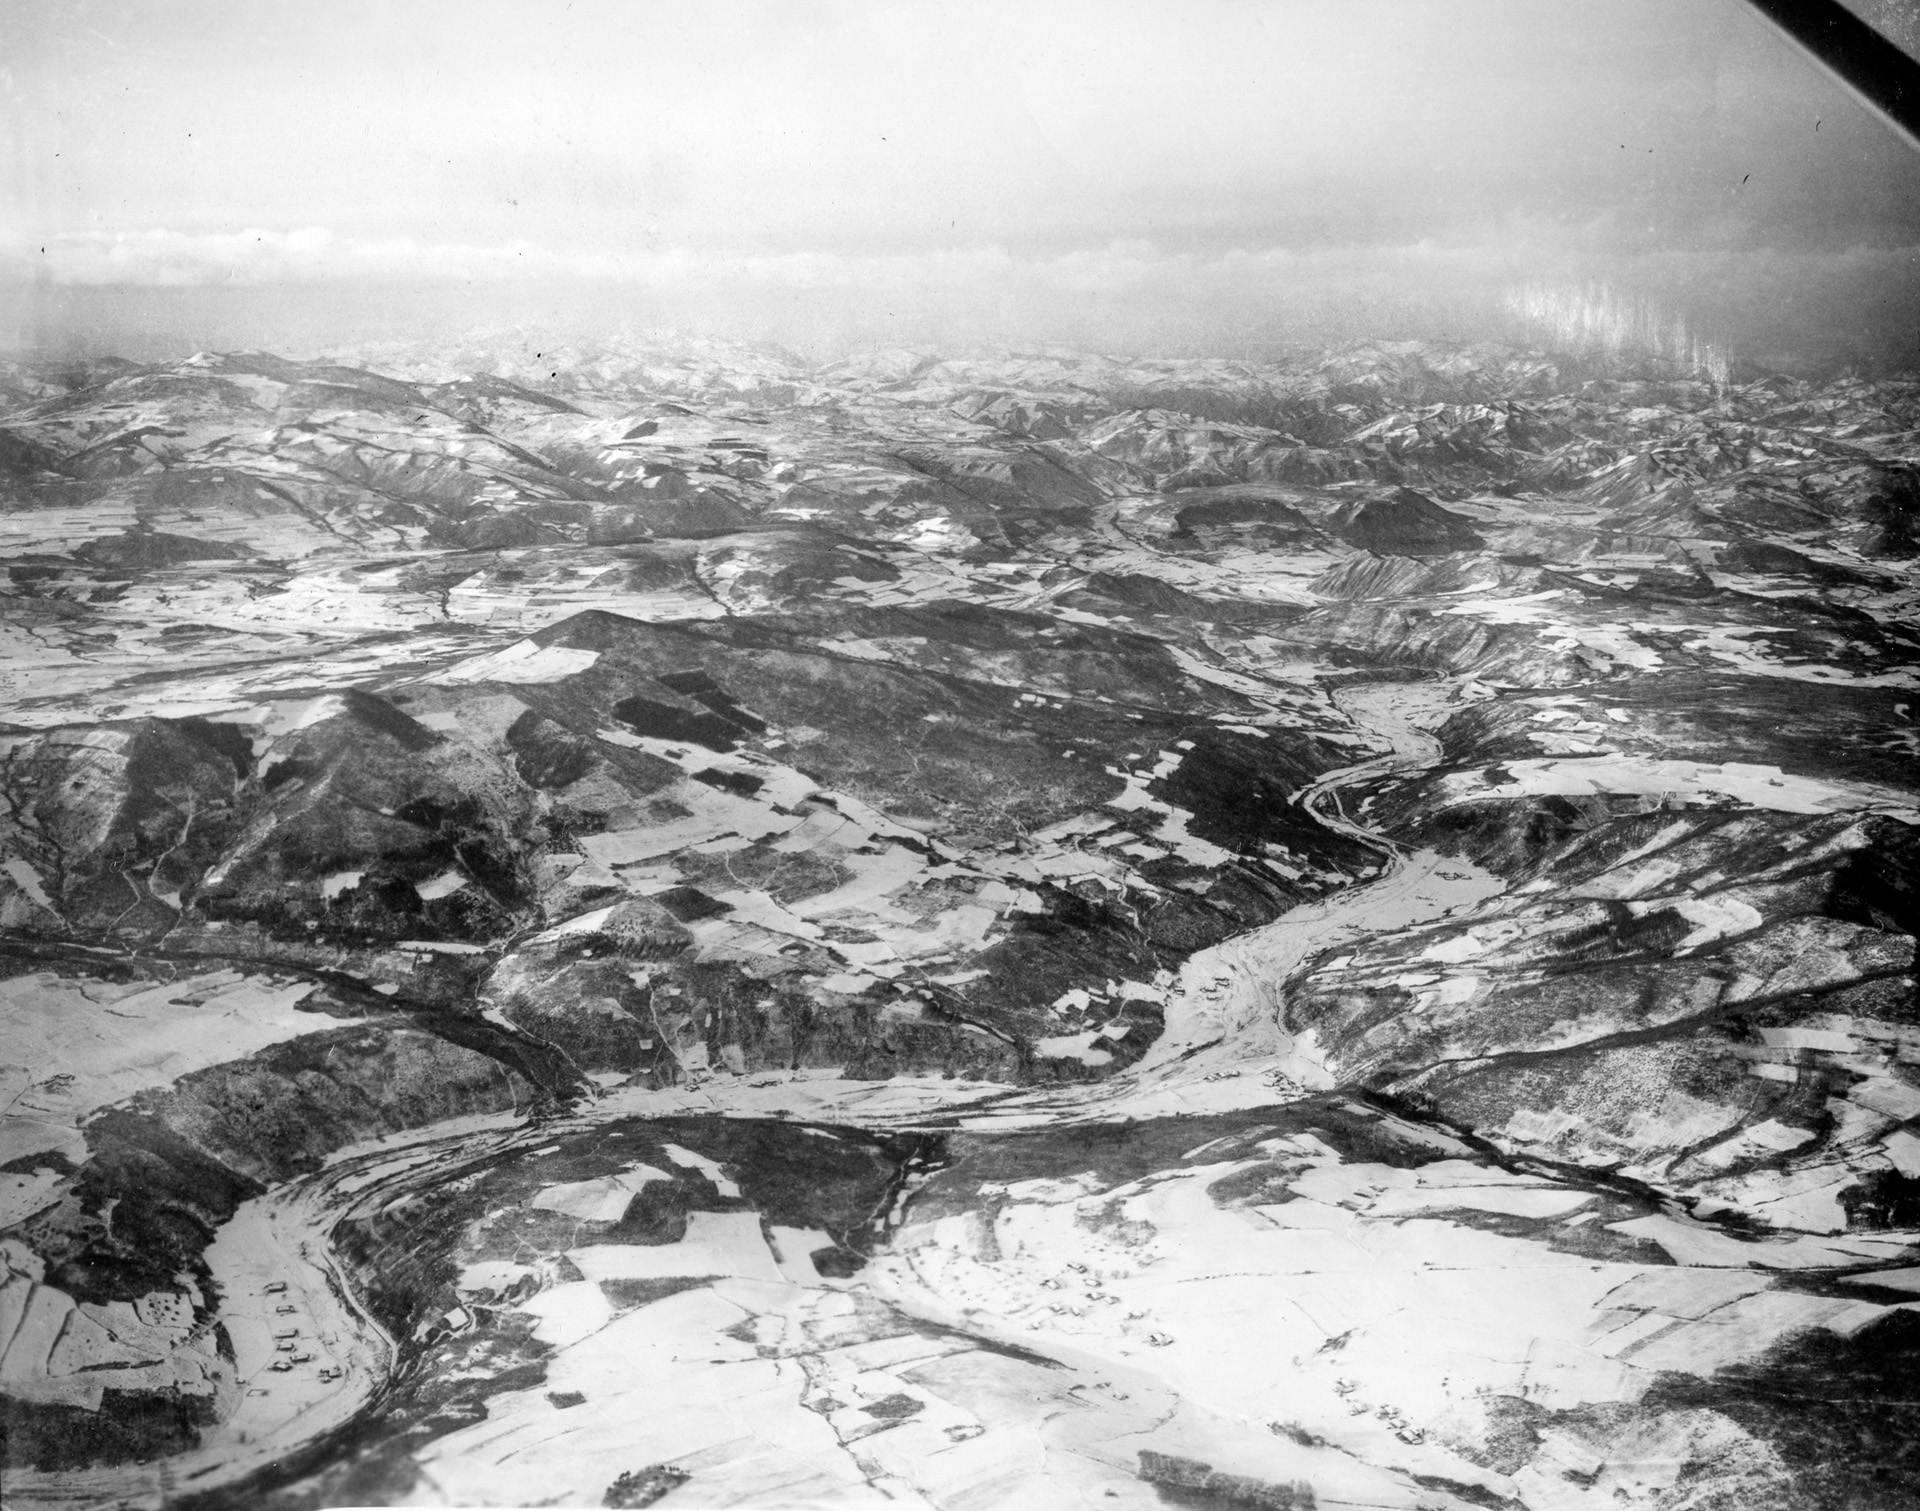 The rugged, unforgiving terrain of North Korea along the Chinese border is evident in this aerial shot taken shortly before the attack of the Chinese Communist Forces. The Chinese victory at the Chosin Reservoir came at a heavy cost in casualties from human wave attacks.